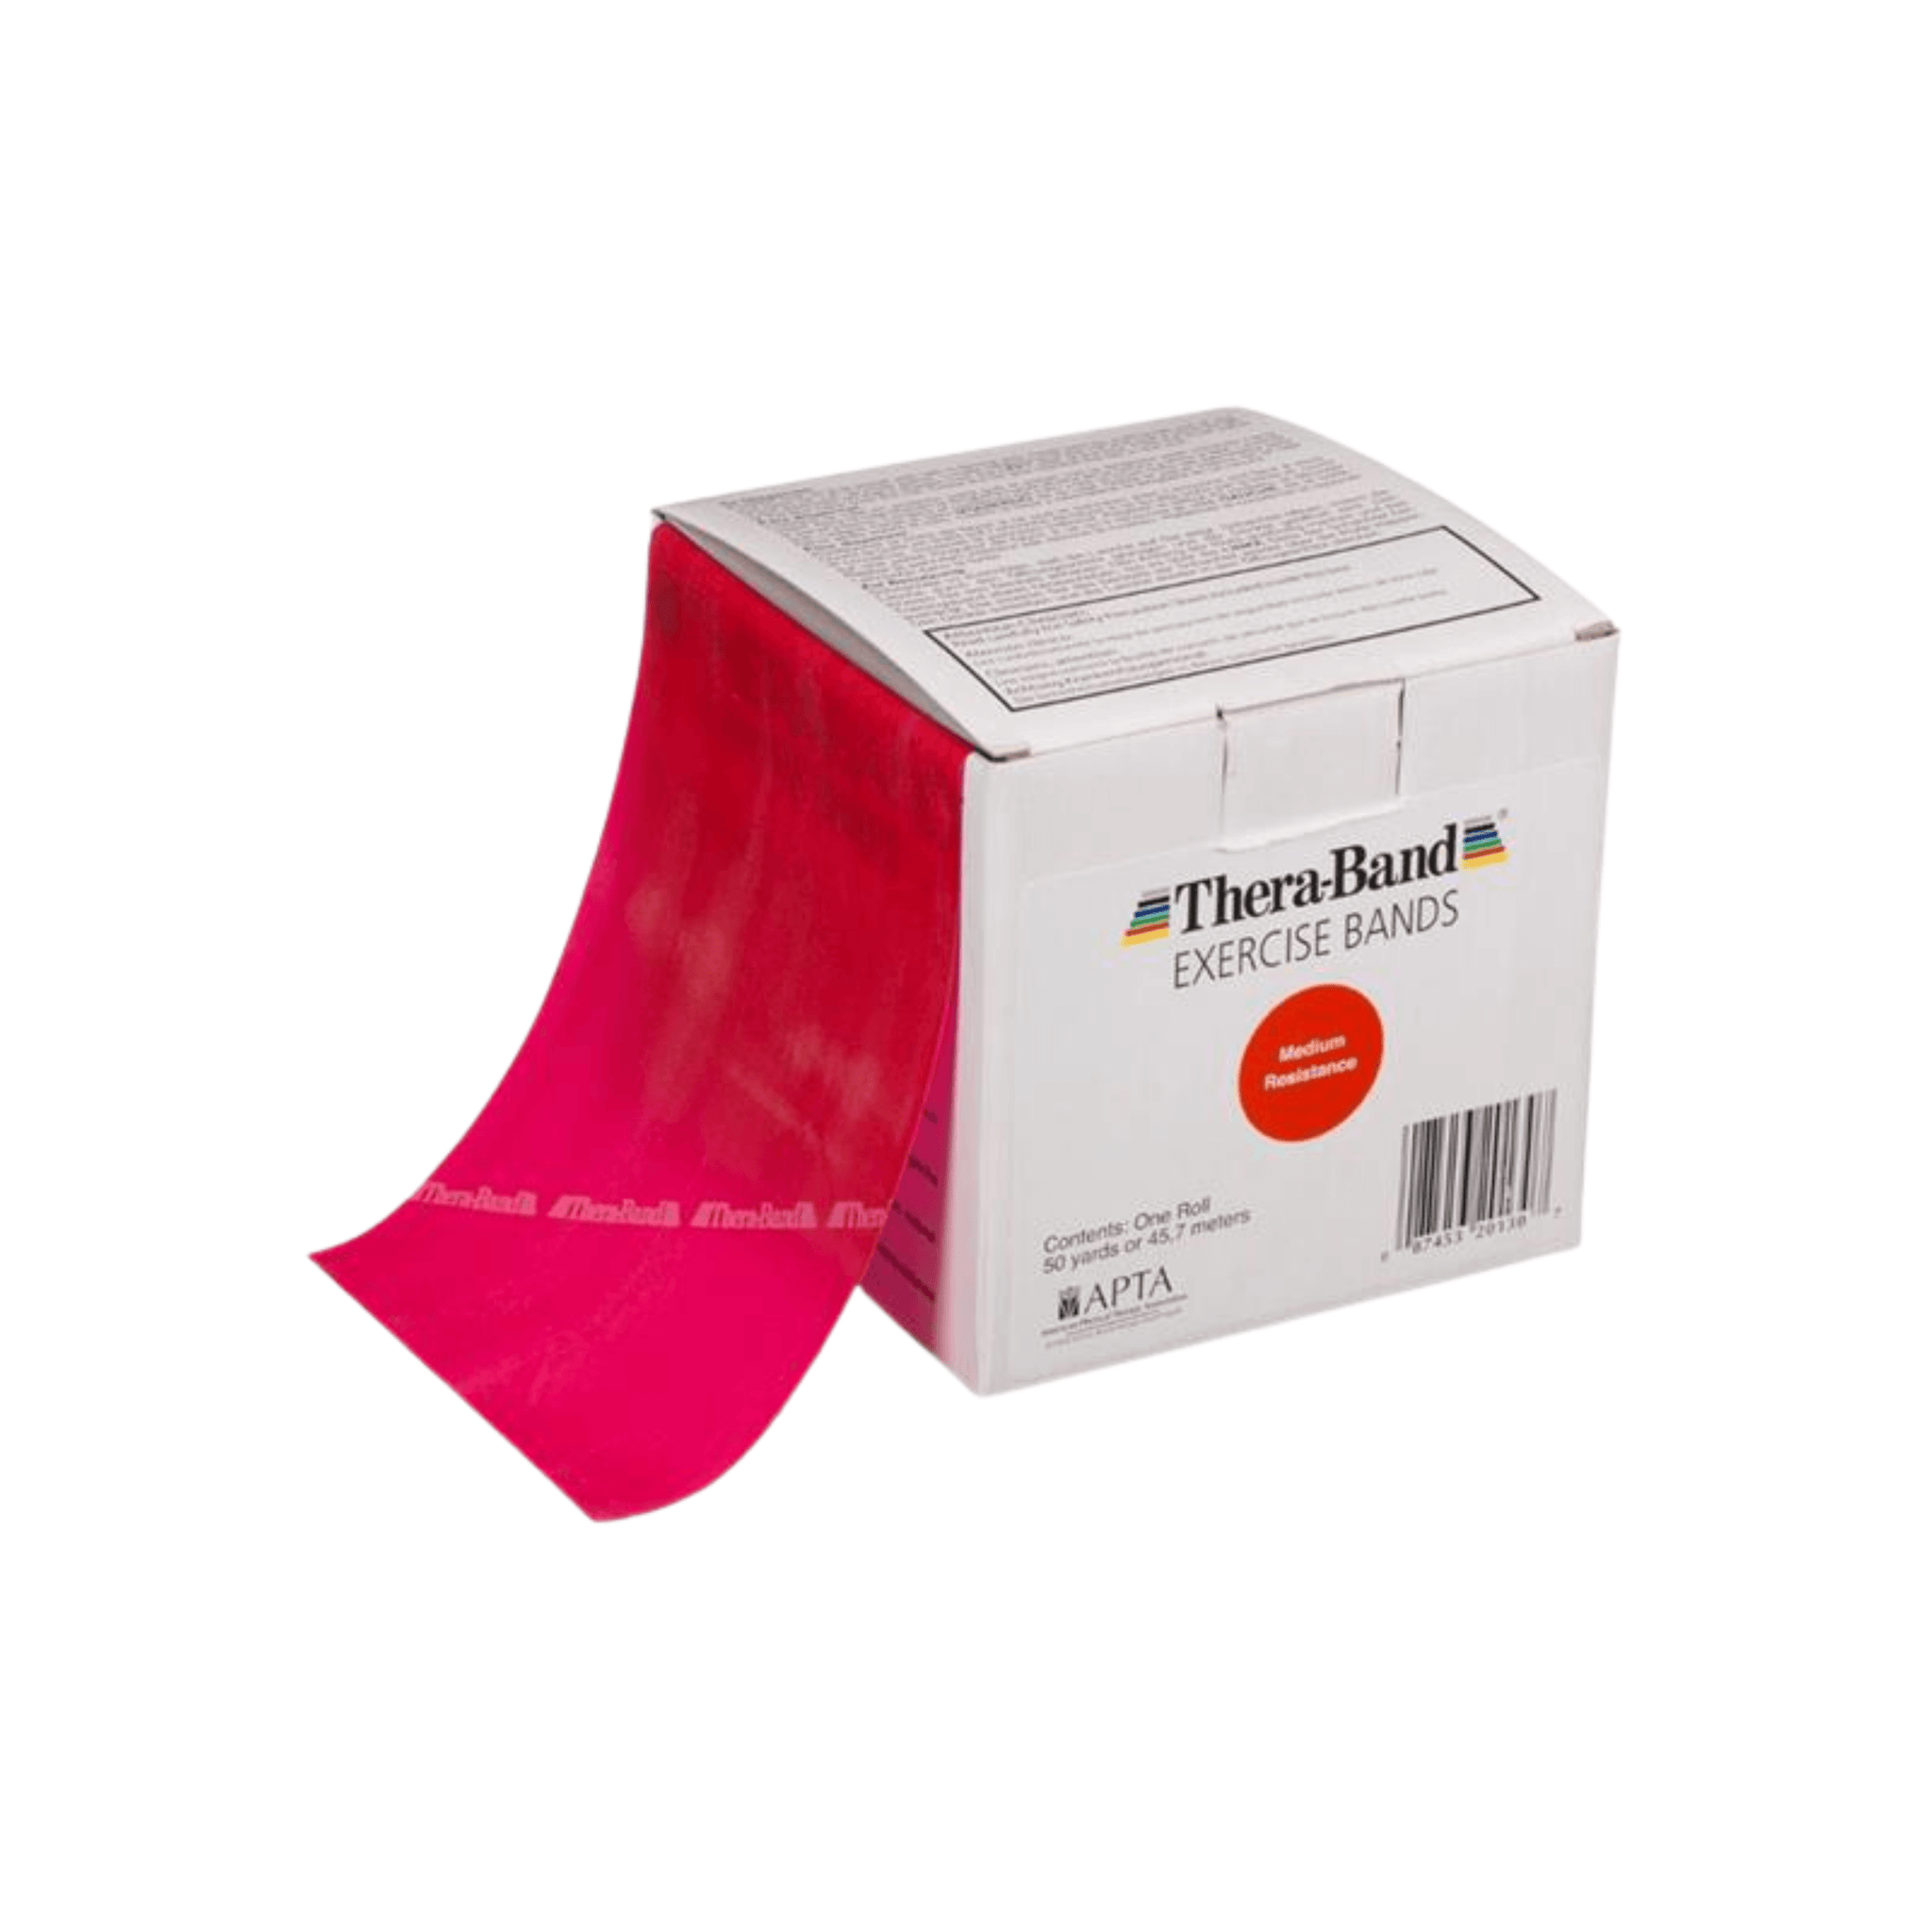 Theraband Resistance Exercise Band- Red, Medium, 1 m Roll